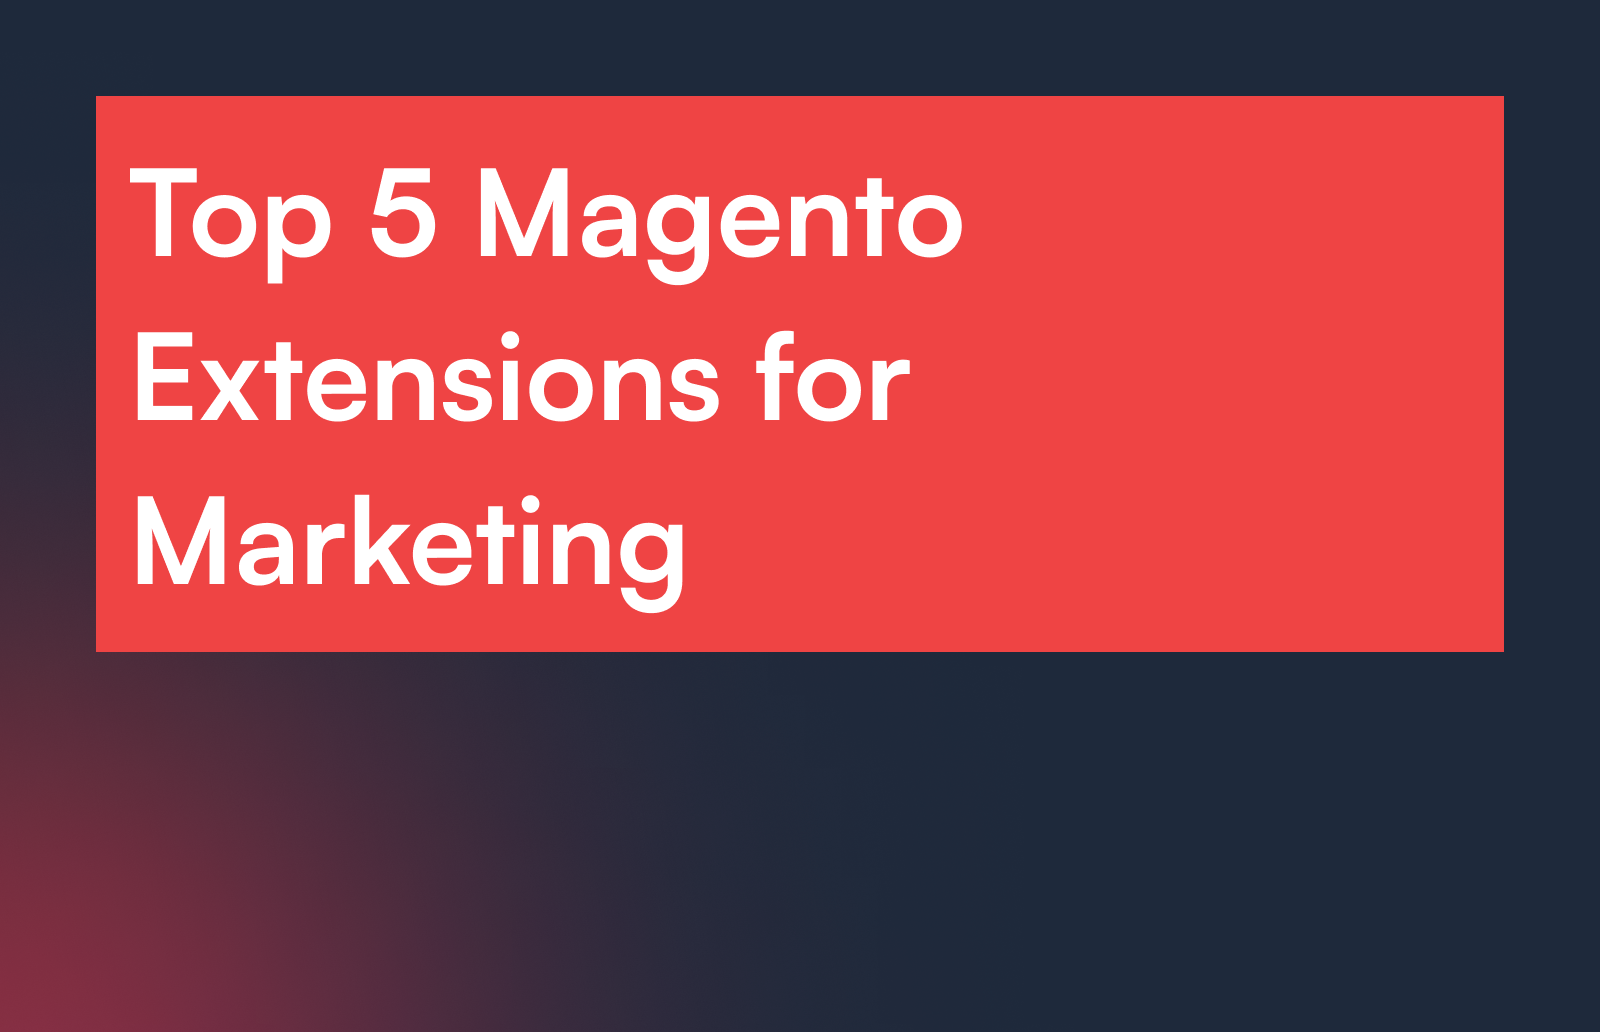 Top 5 Magento Extensions for Marketing